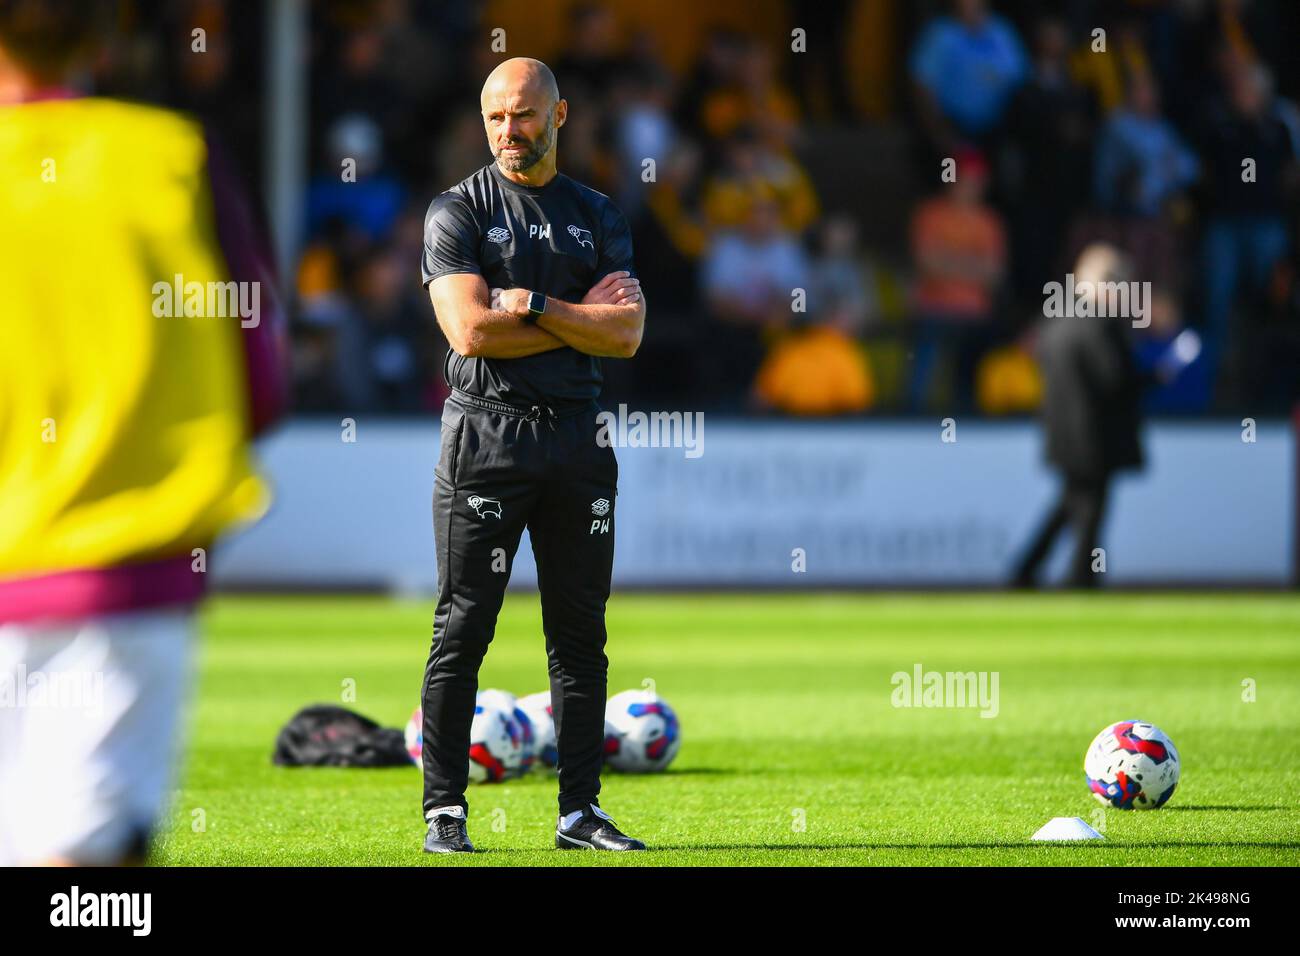 Cambridge, UK. 1st October 2022Manager Paul Warne ( Paul Warne Derby) during warm up the Sky Bet League 1 match between Cambridge United and Derby County at the R Costings Abbey Stadium, Cambridge on Saturday 1st October 2022. Credit: MI News & Sport /Alamy Live News Stock Photo